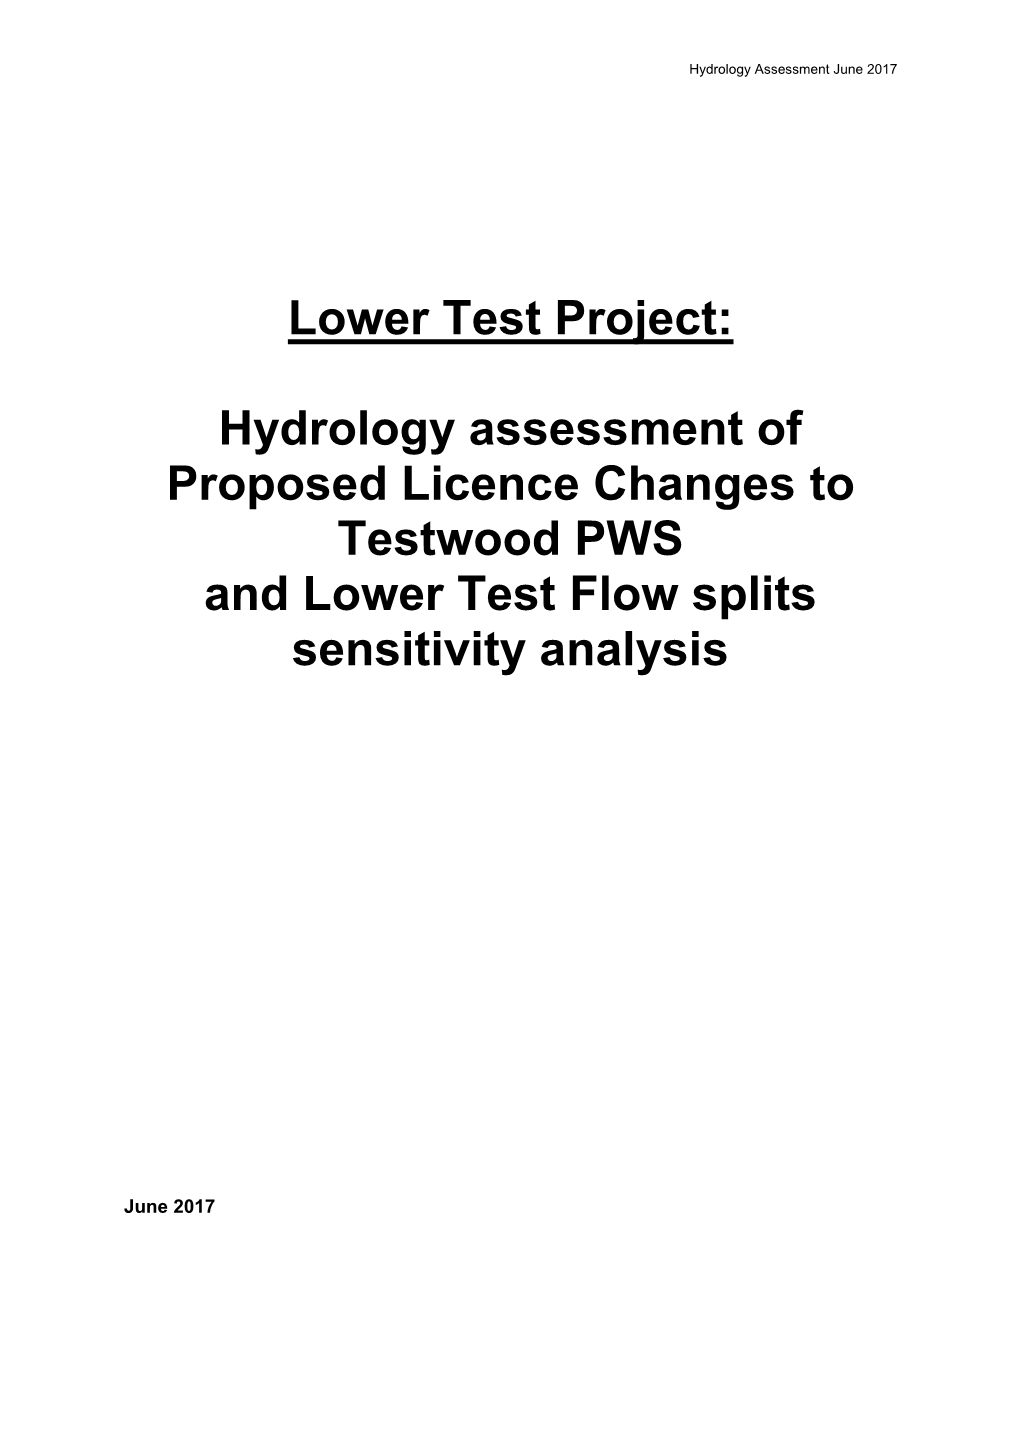 Hydrology Assessment of Proposed Licence Changes to Testwood PWS and Lower Test Flow Splits Sensitivity Analysis